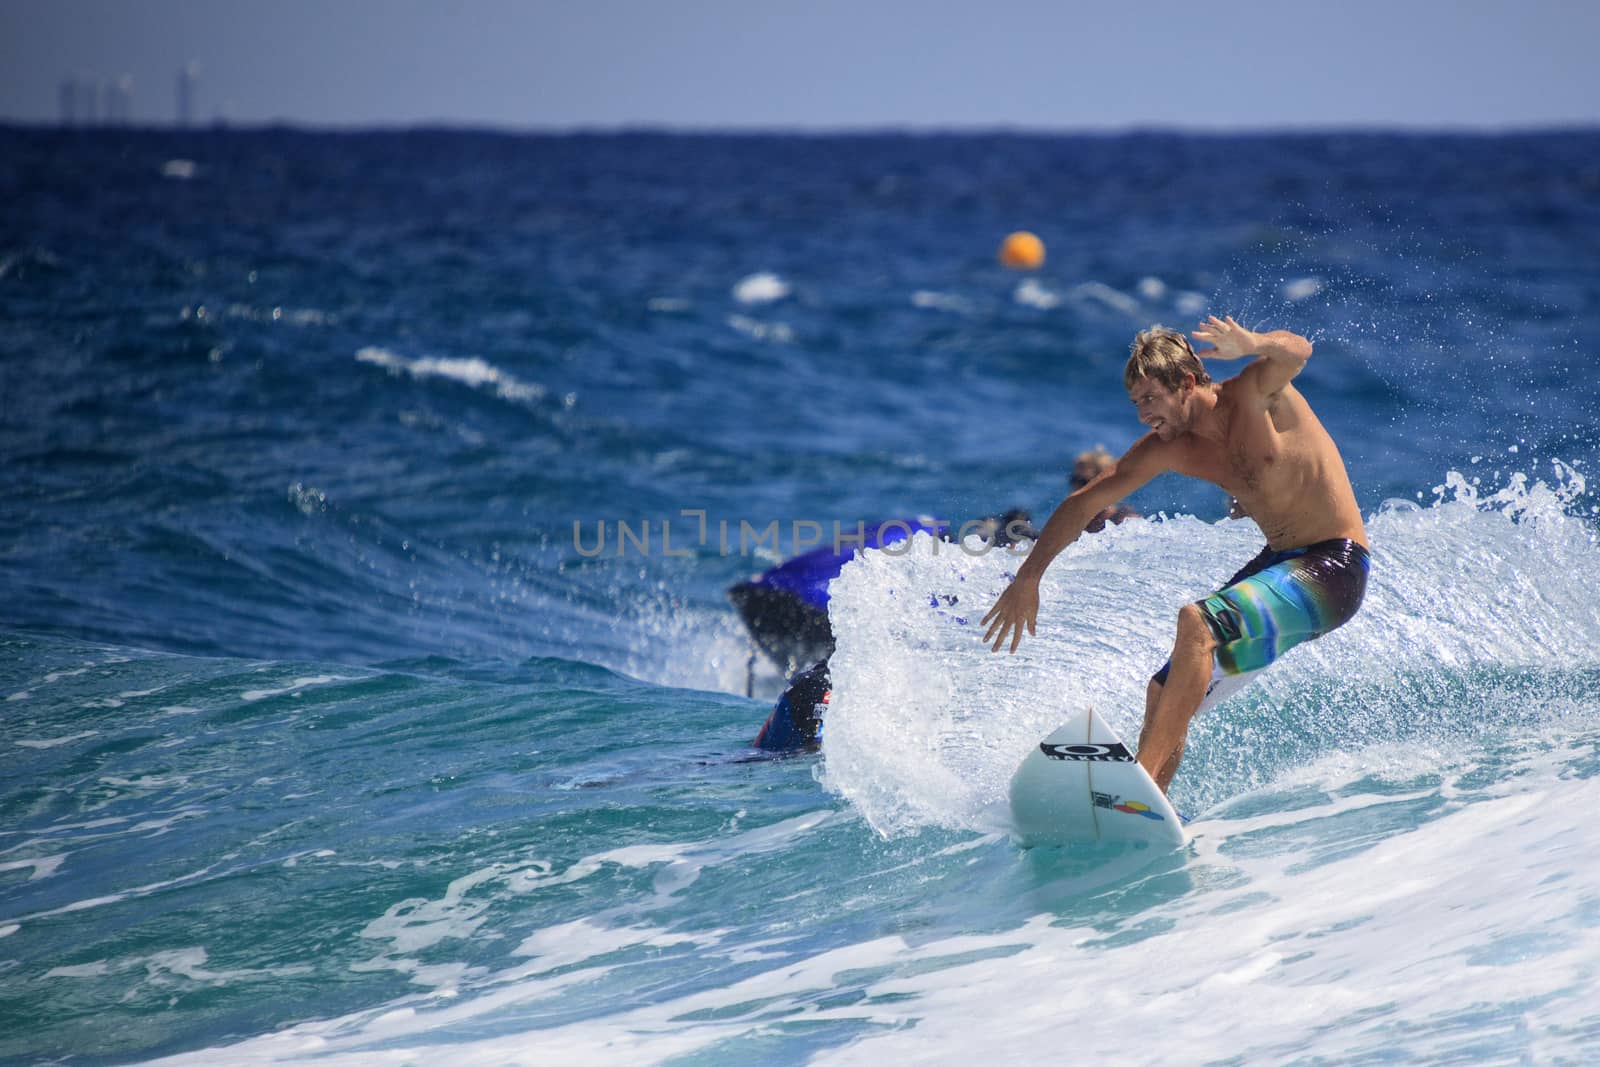 Surfing in Australai by Imagecom